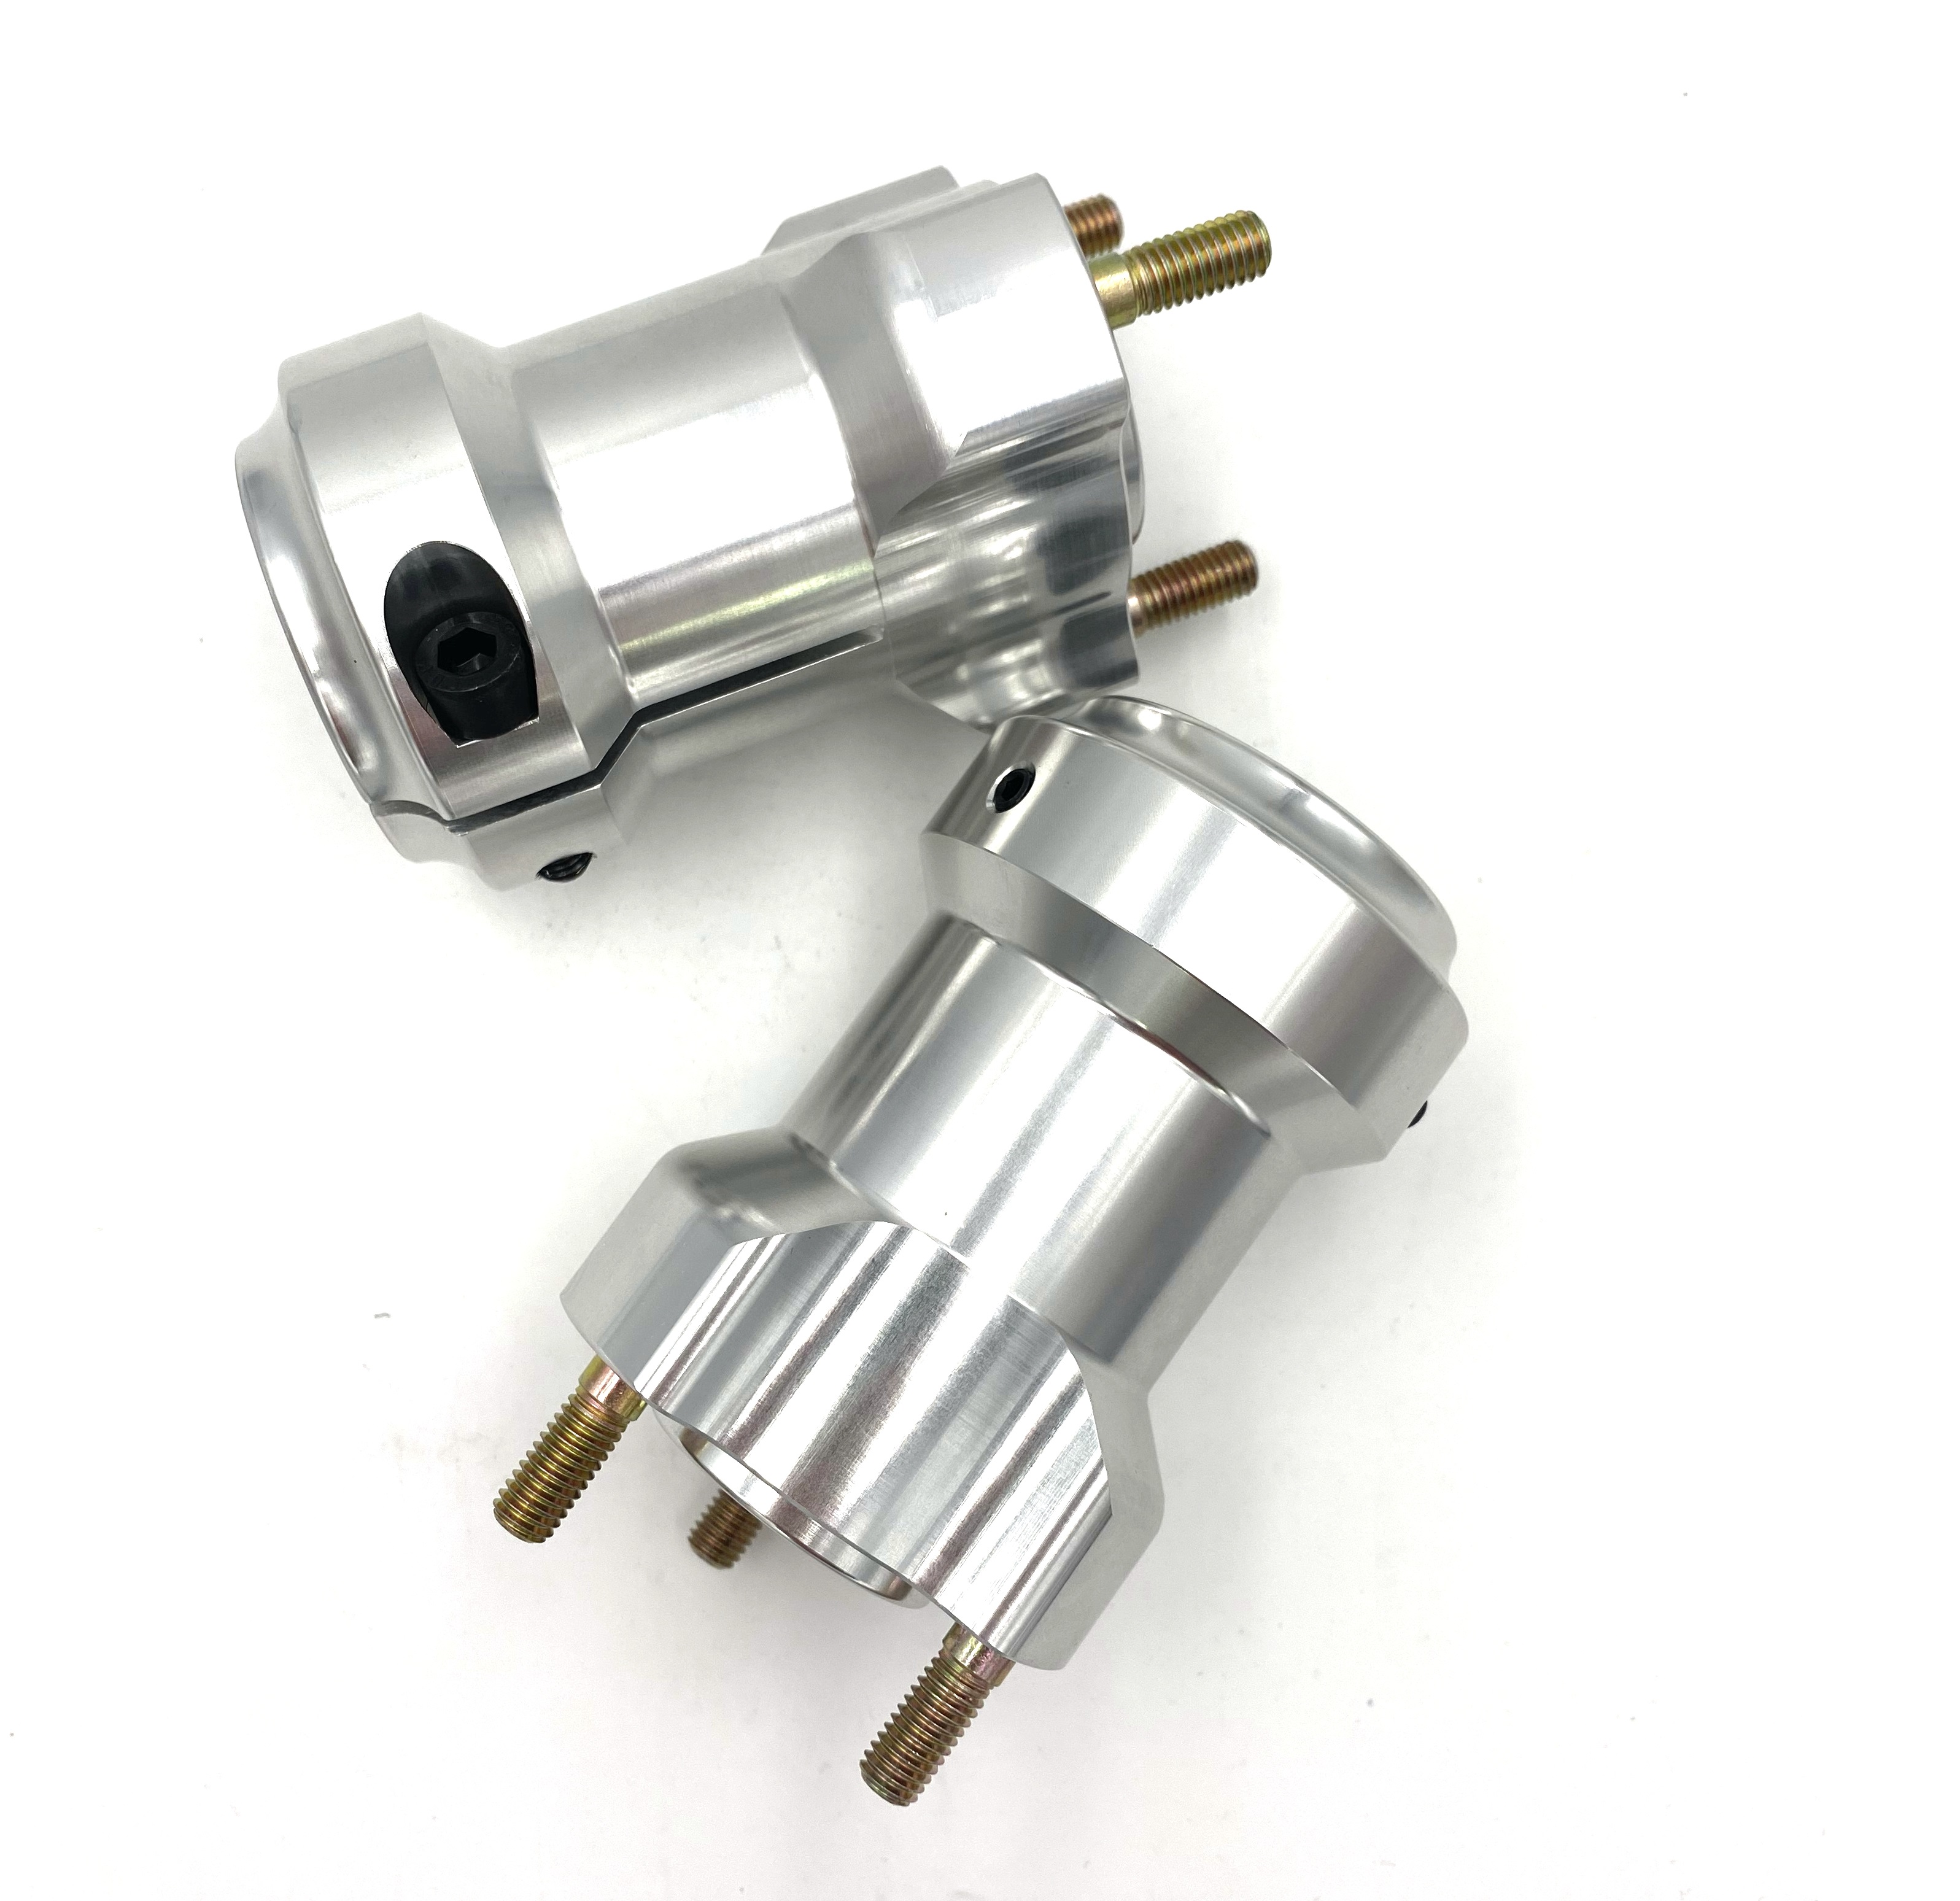 Wholesale Kart Cable Connector Manufacturers - Super September Aluminum Rear Wheel Hub For Outdoor Go Kart – Tongbao